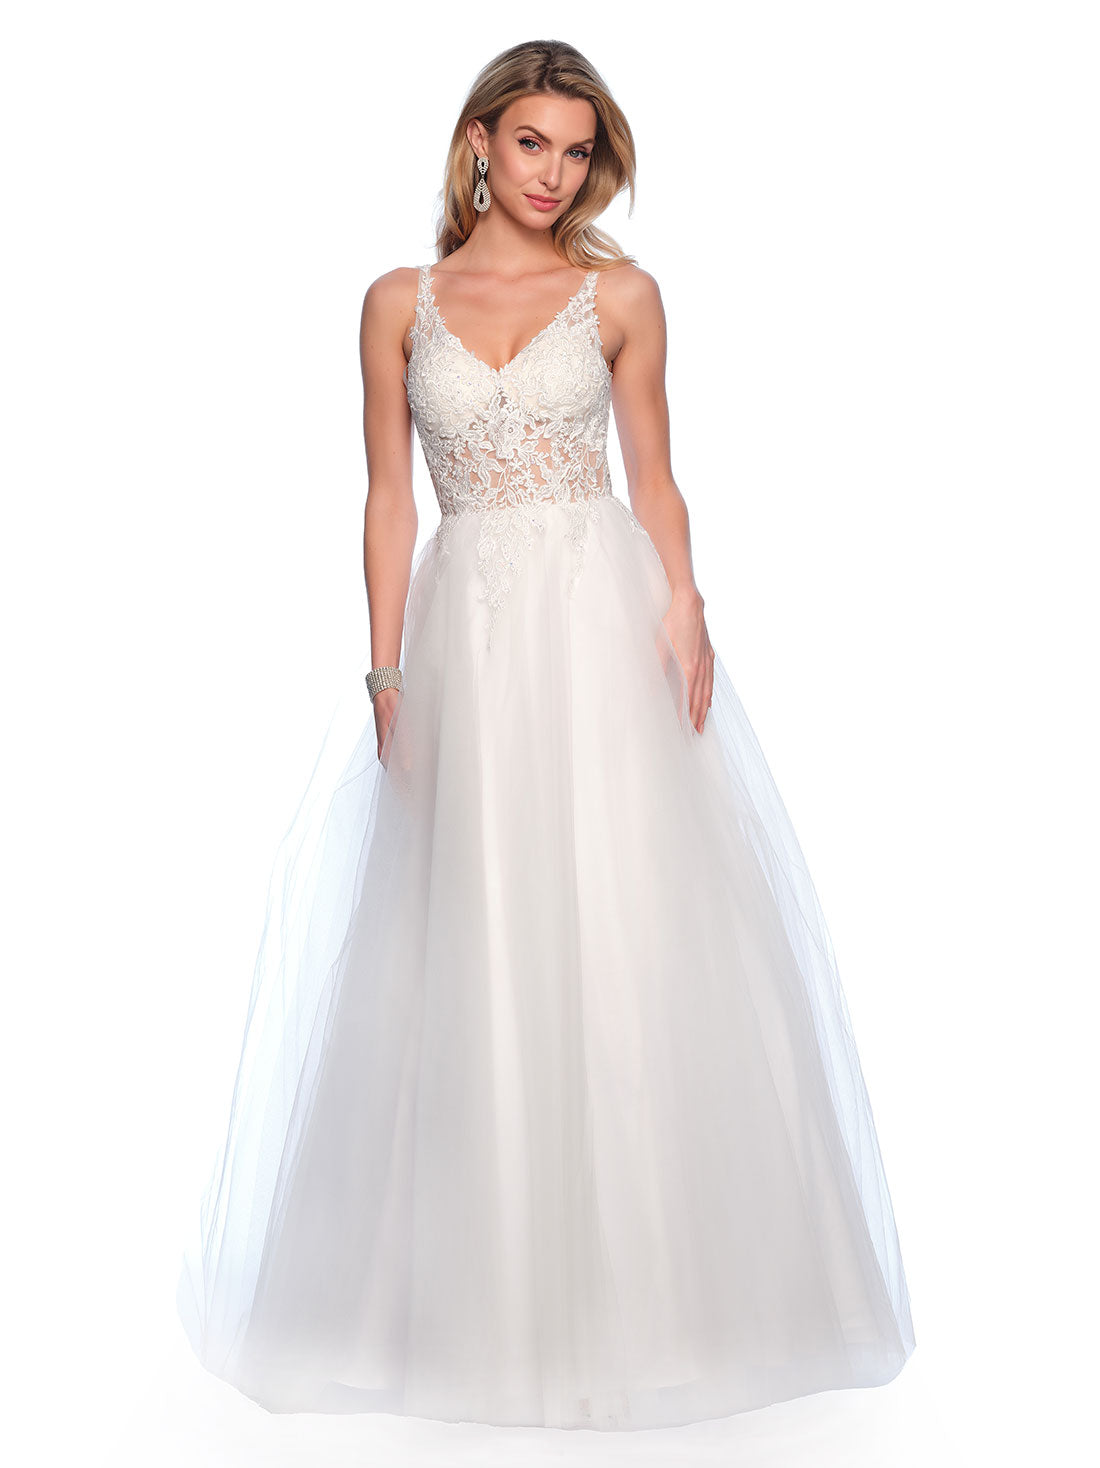 ILLUSION EMBROIDERED BODICE WITH FULL TULLE SKIRT